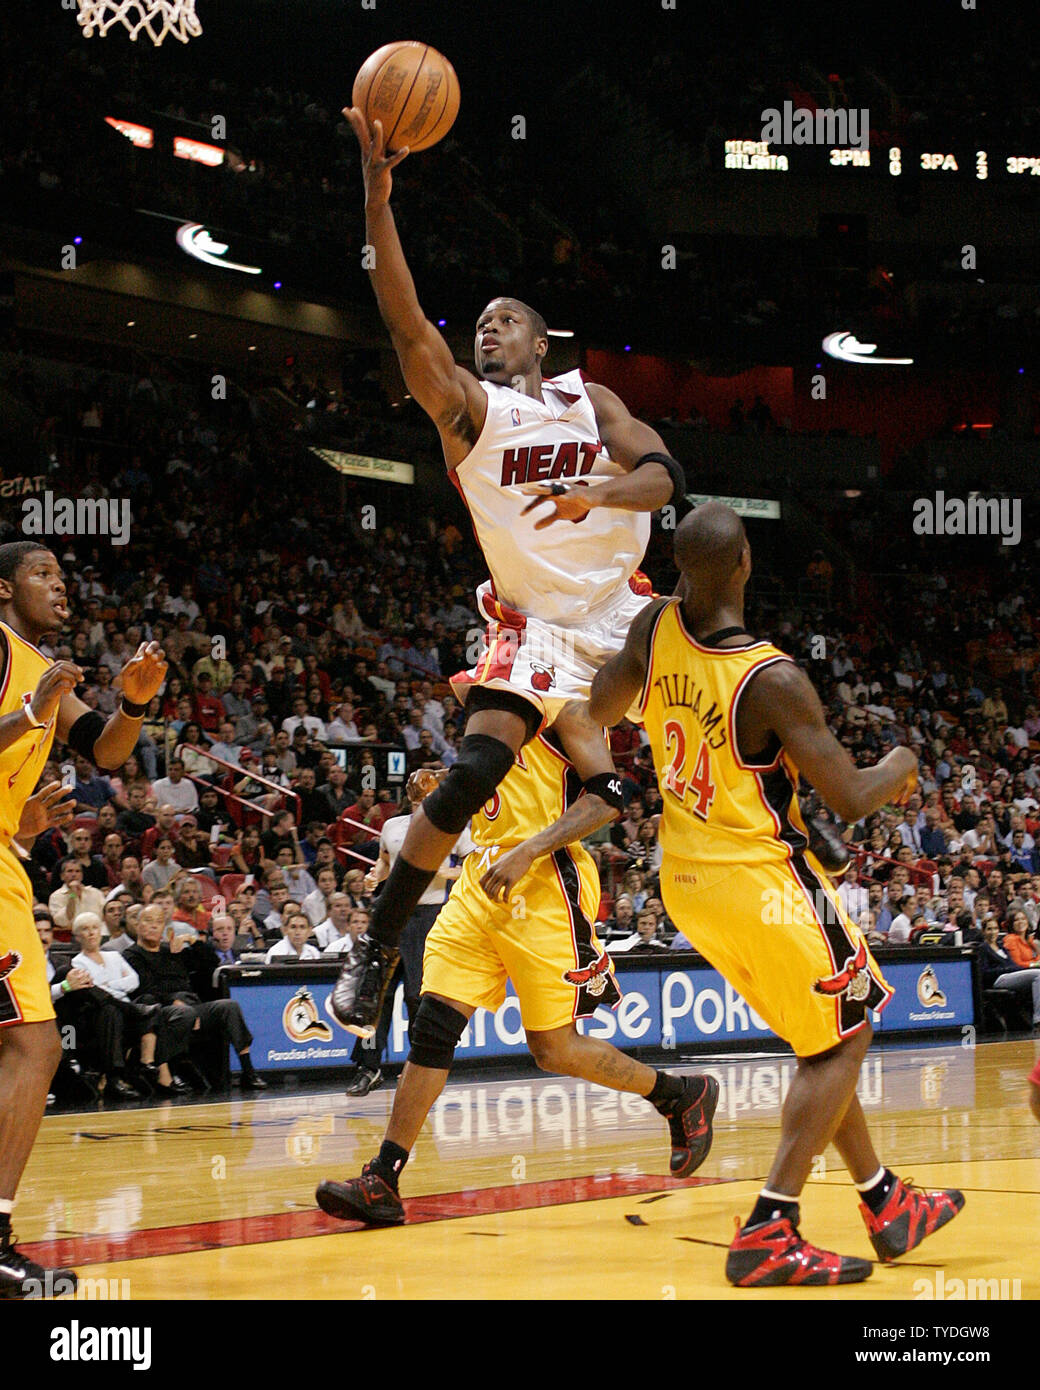 Miami Heats Dwyane Wade drives to the basket over Atlanta Hawk Marvin Williams in first half action, at the American Airlines Arena, in Miami,  Florida, on December 20, 2005.  (UPI Photo/Michael Bush) Stock Photo